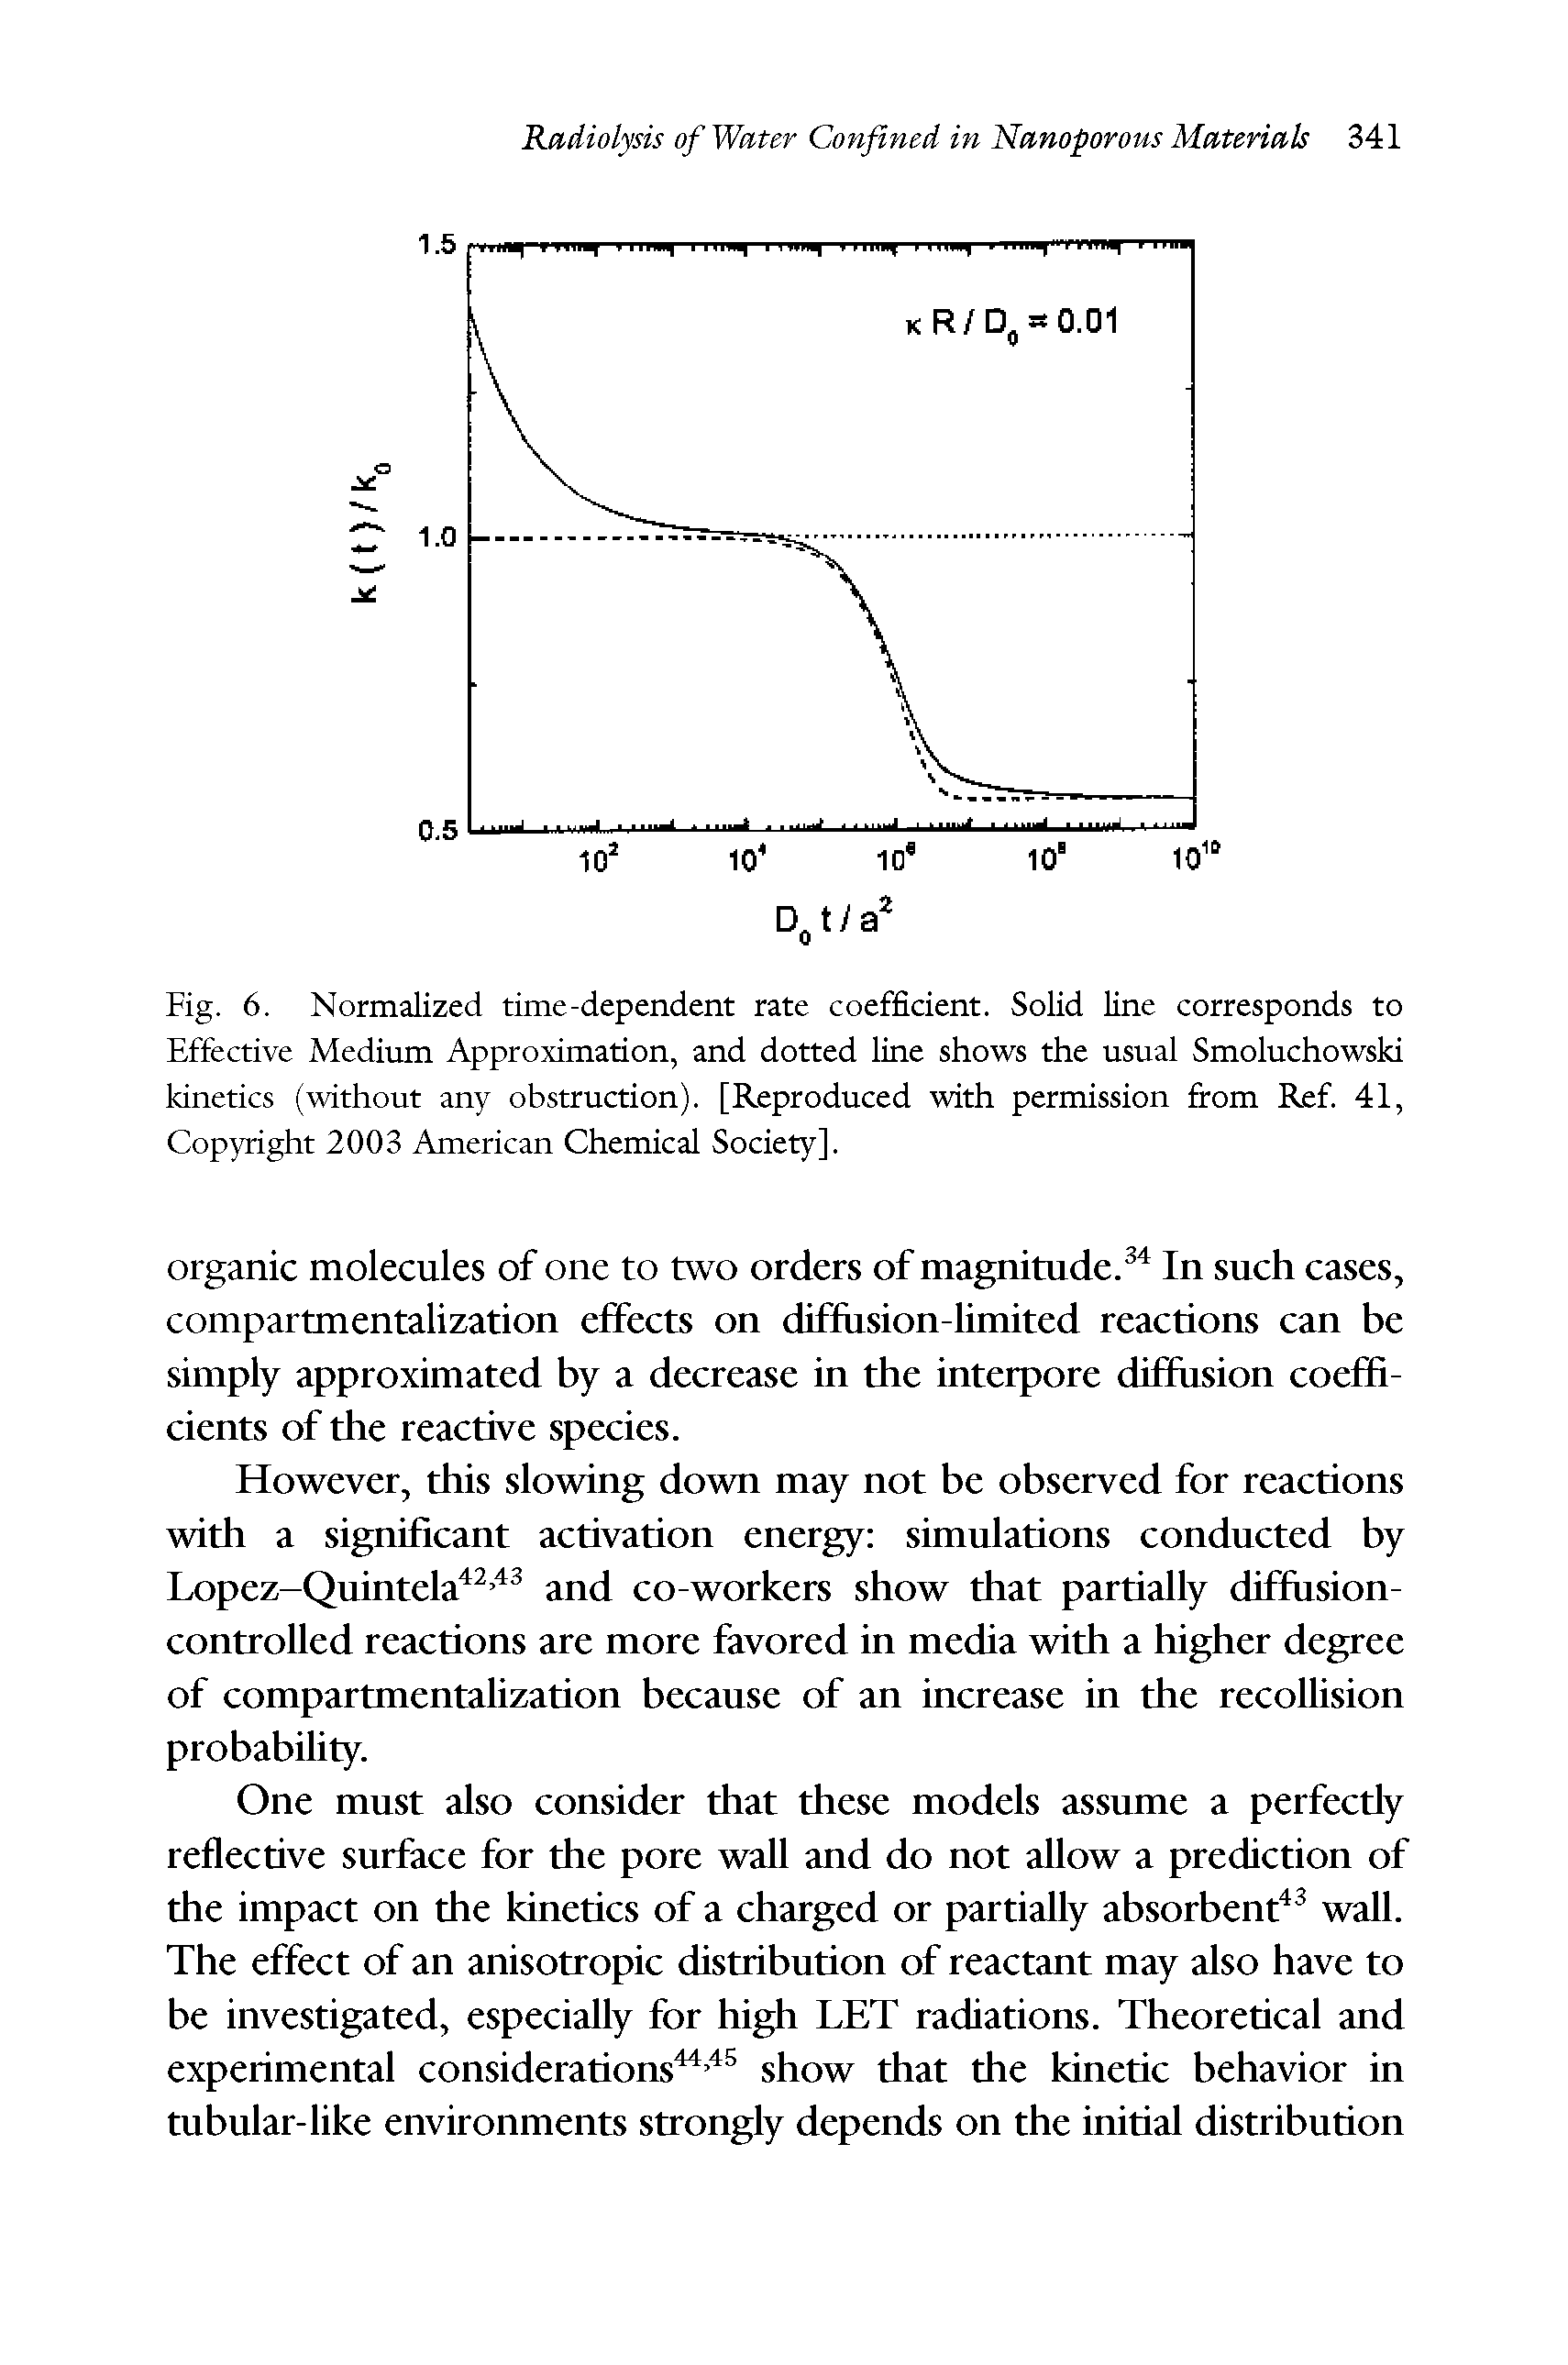 Fig. 6. Normalized time-dependent rate coefficient. Solid line corresponds to Effective Medium Approximation, and dotted line shows the usual Smoluchowski kinetics (without any obstruction). [Reproduced with permission from Ref. 41, Copyright 2003 American Chemical Society].